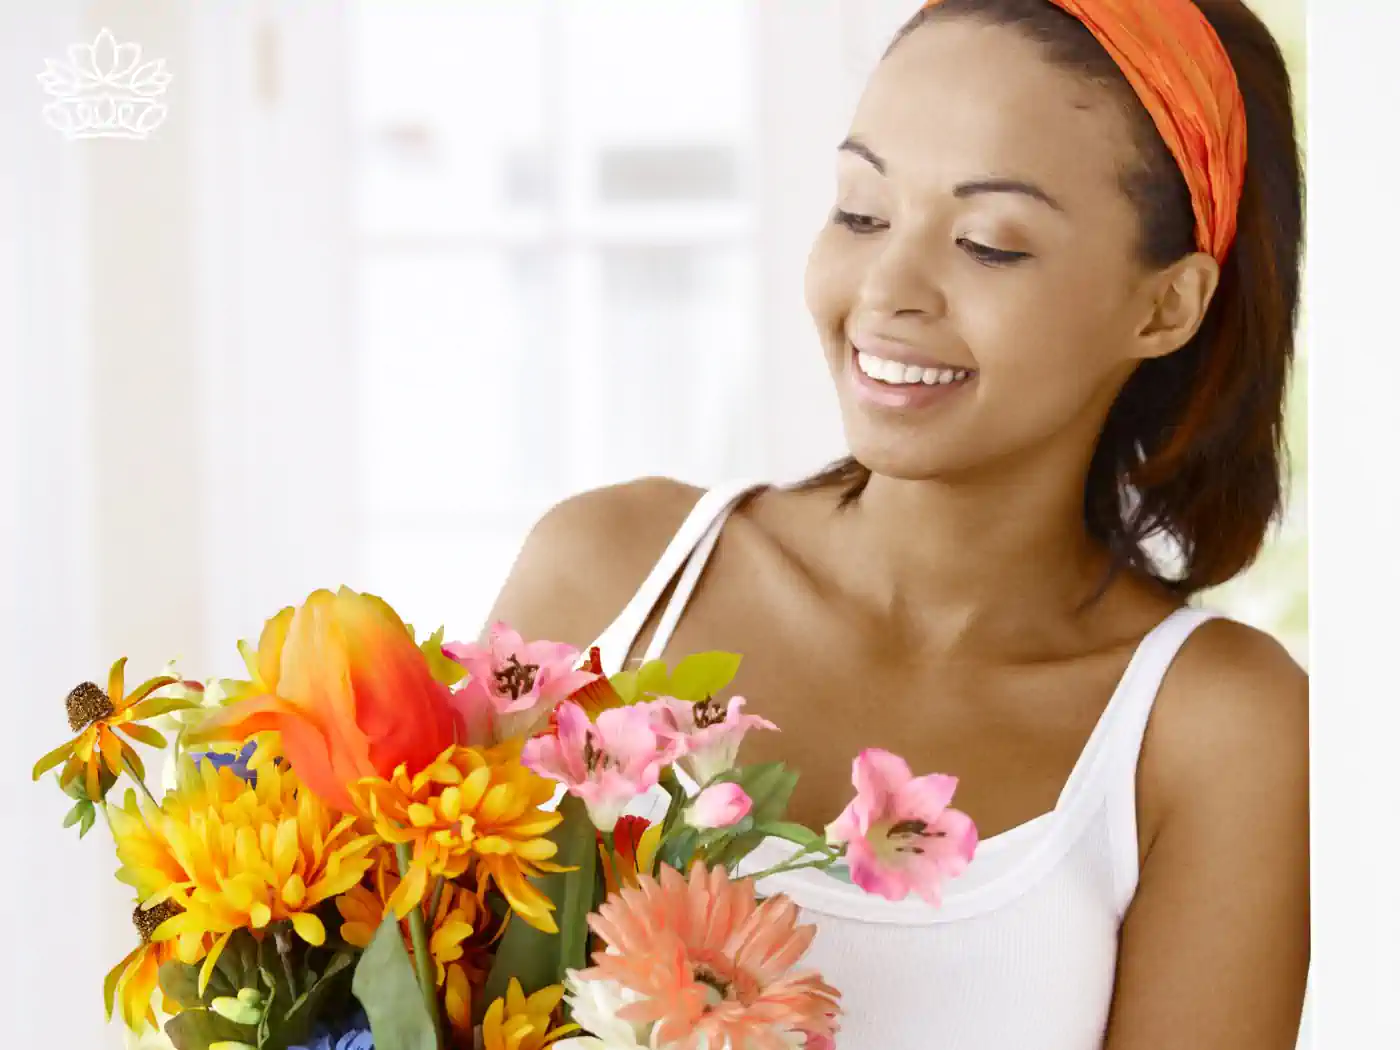 Young woman smiling brightly while holding a vibrant floral arrangement in her hands. Fabulous Flowers and Gifts, Luxury Flower Arrangements.